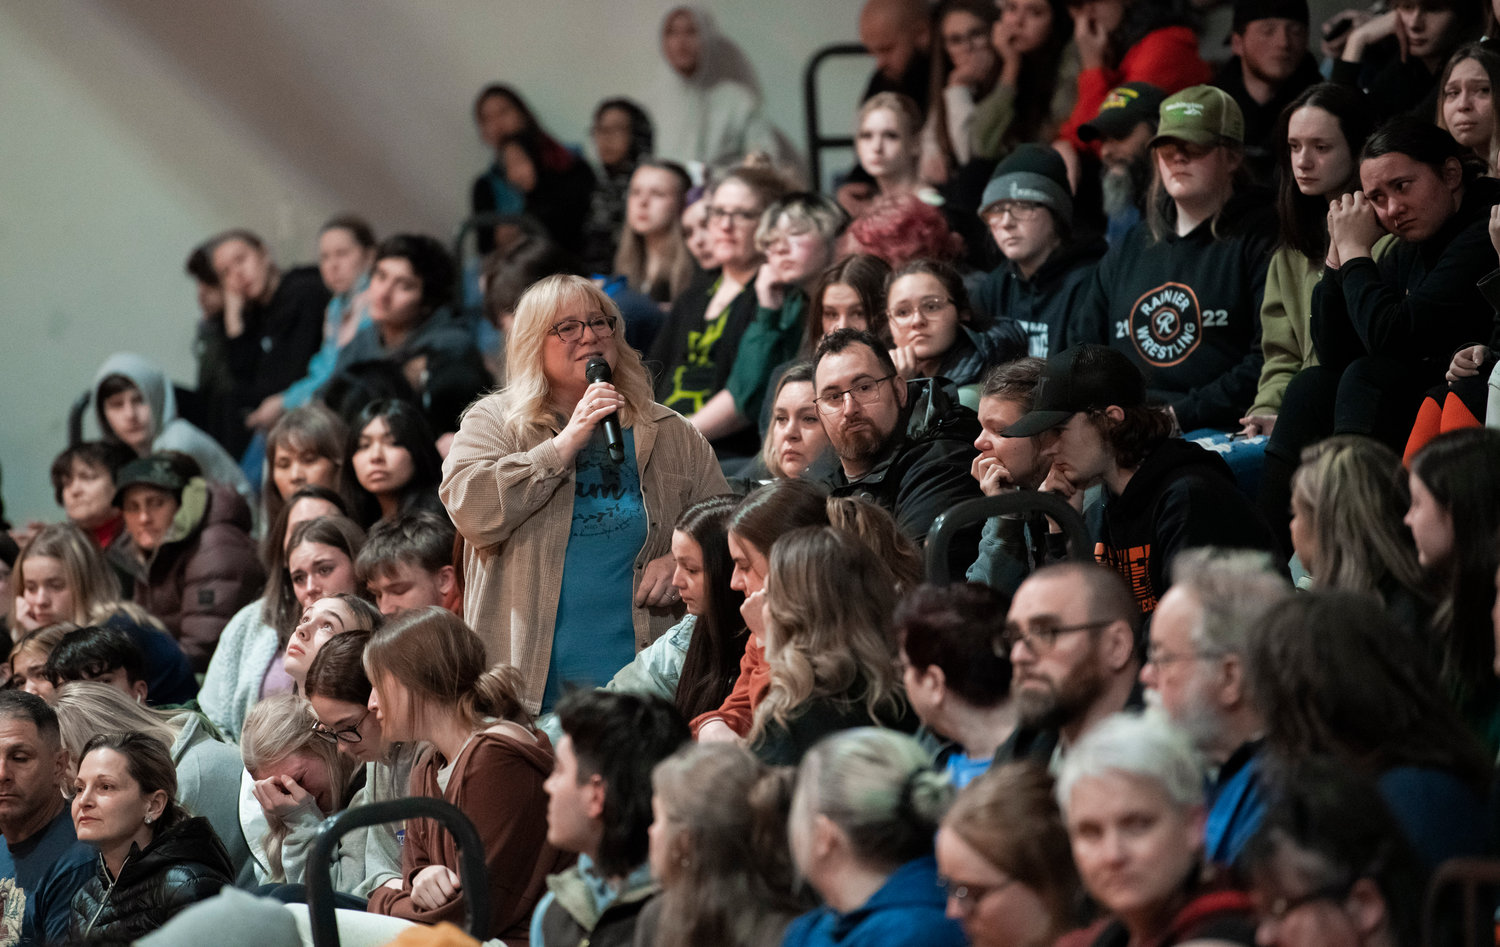 Friends and family members stand up to speak about Jessie Uch during a vigil at Rainier High School on Tuesday.